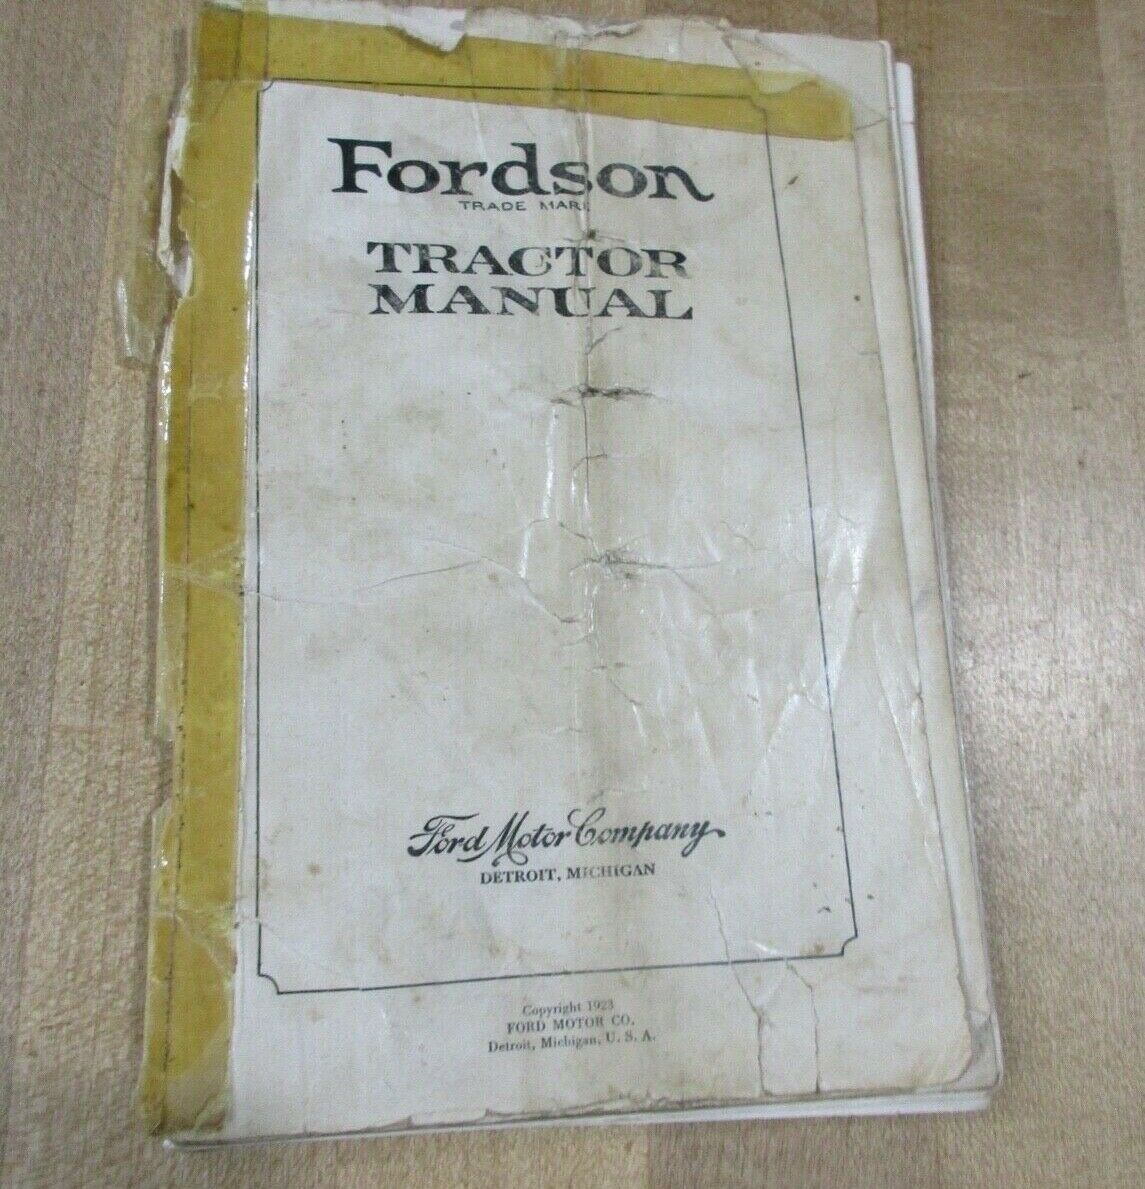 1923 Fordson Tractor Manual Ford Motor Co.  (ba)